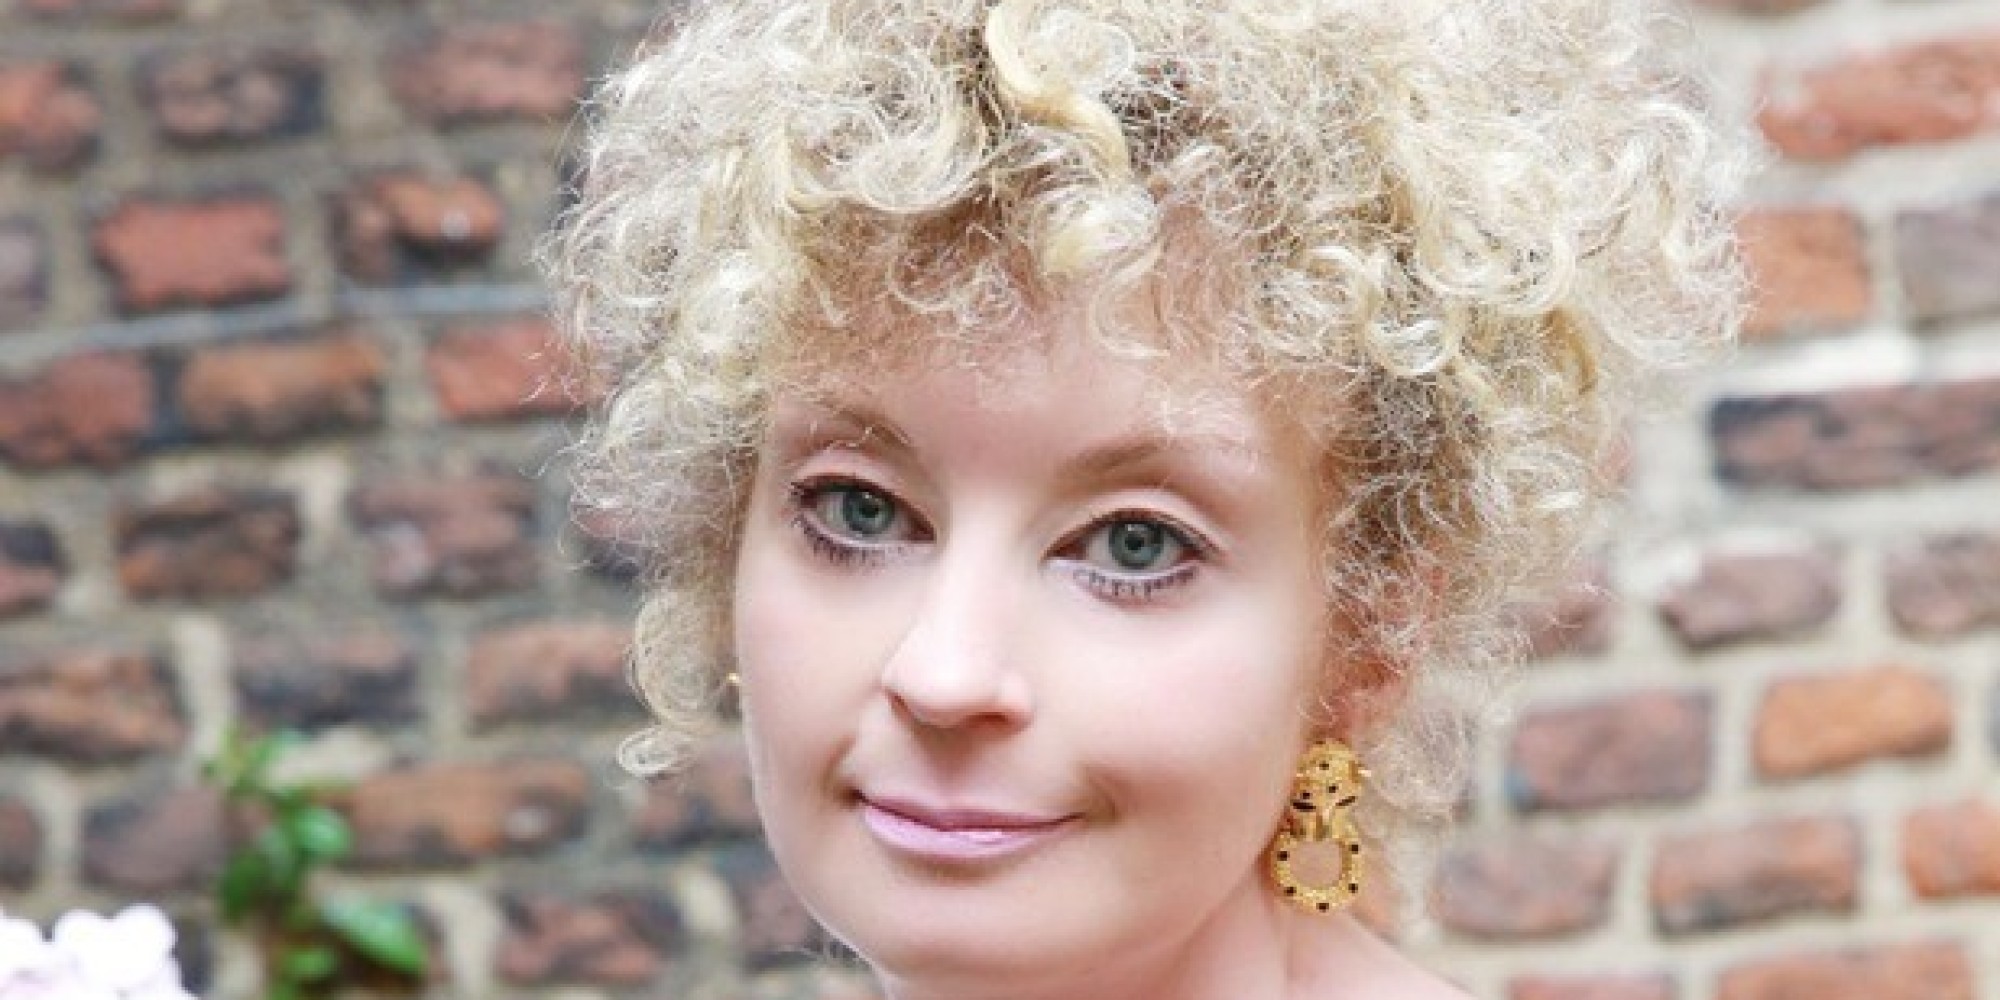 Lauren Harries, Once Britain's 'Youngest Tycoon,' Opens Up About Her